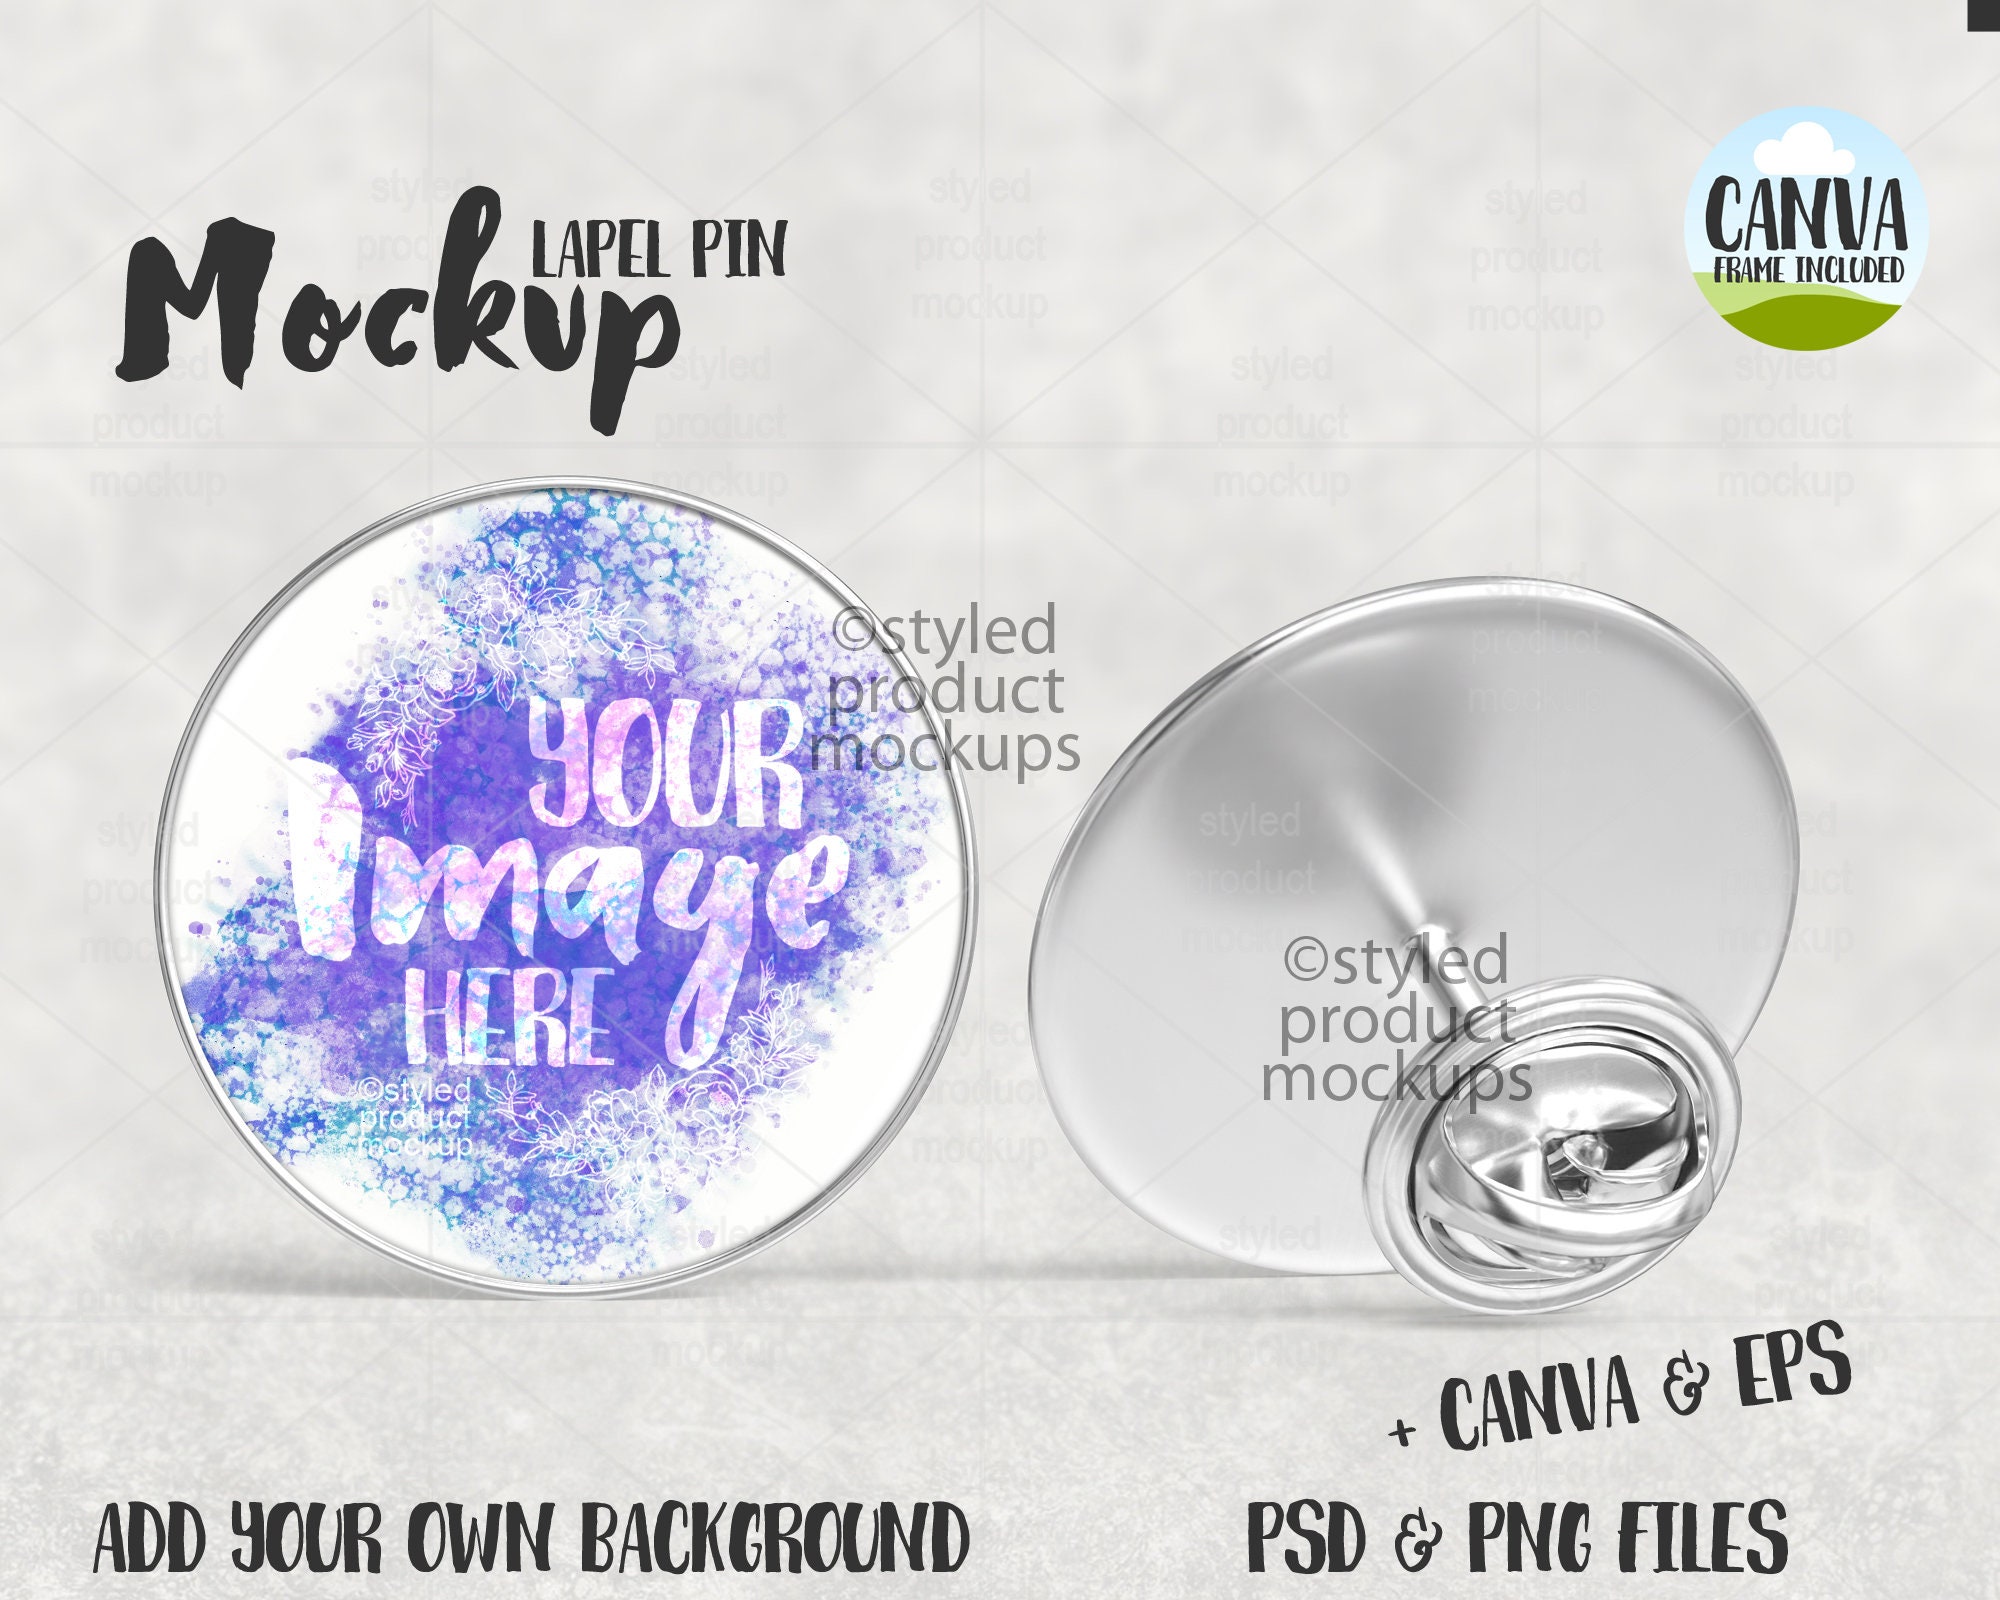 Blank Sublimation Buttons (Unisub) w/adhesive bar pin